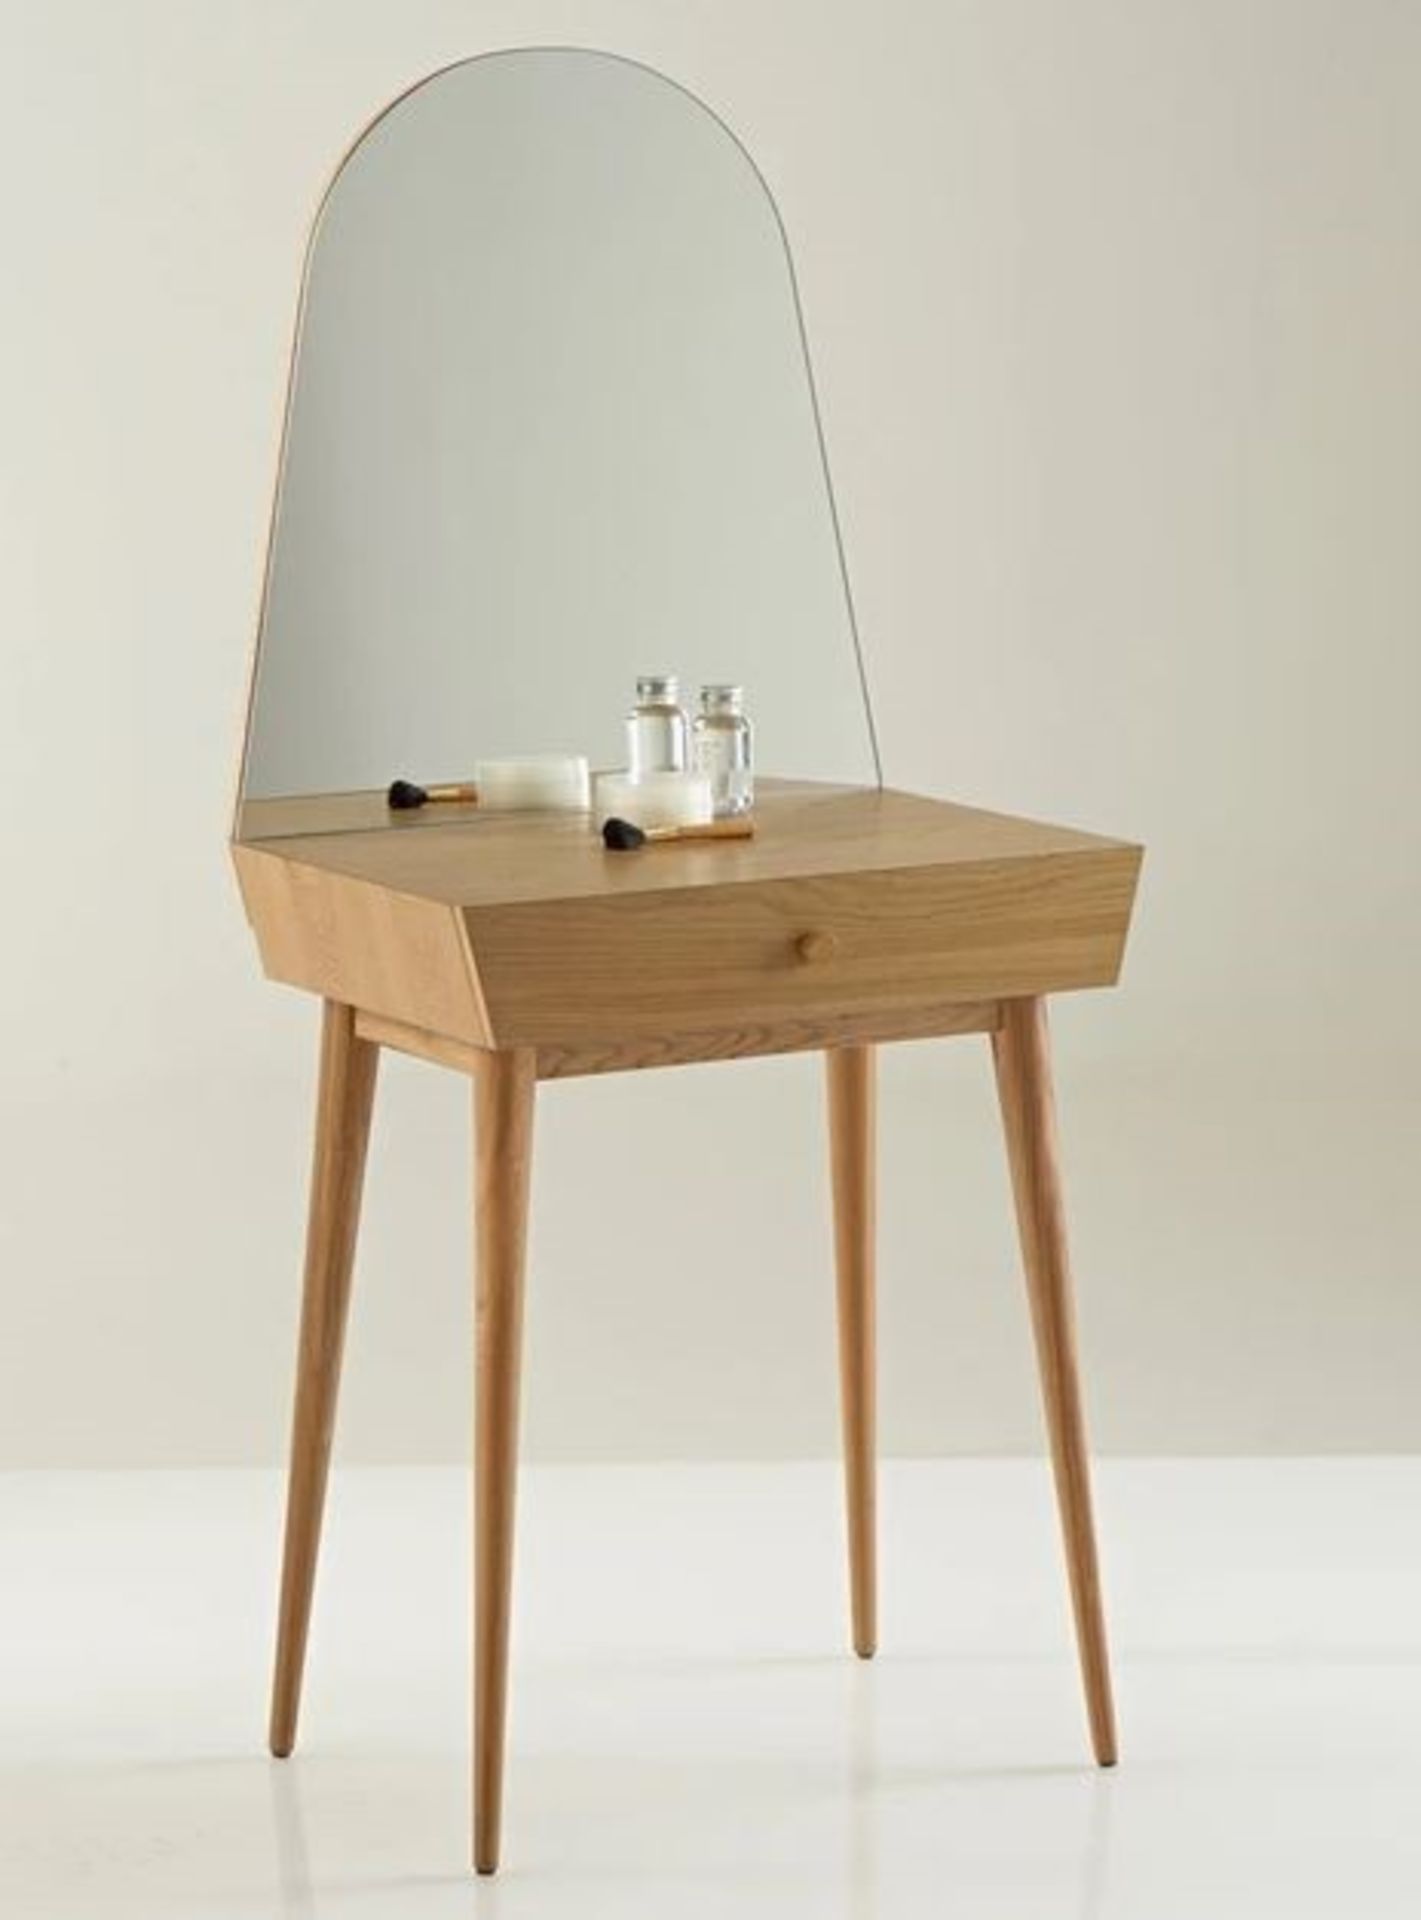 1 GRADE B BOXED DESIGNER CLAIROY 1 DRAWER SCANDI STYLE DRESSING TABLE IN OAK/ RRP £165.00 (PUBLIC - Image 2 of 2